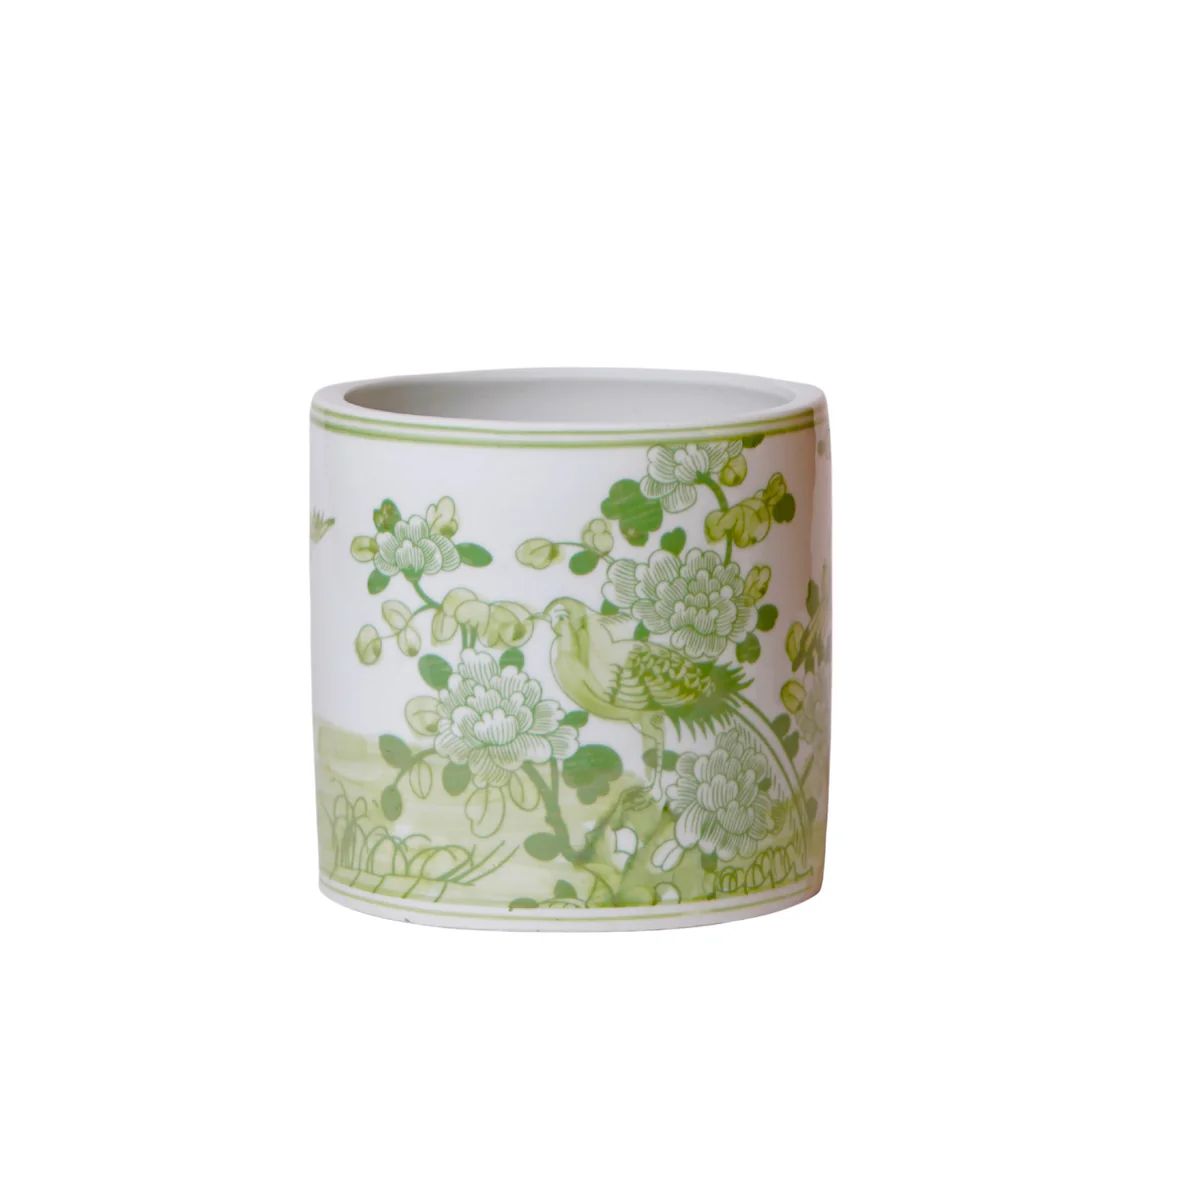 Small Green and White Porcelain Bird and Flower Cachepot | The Well Appointed House, LLC